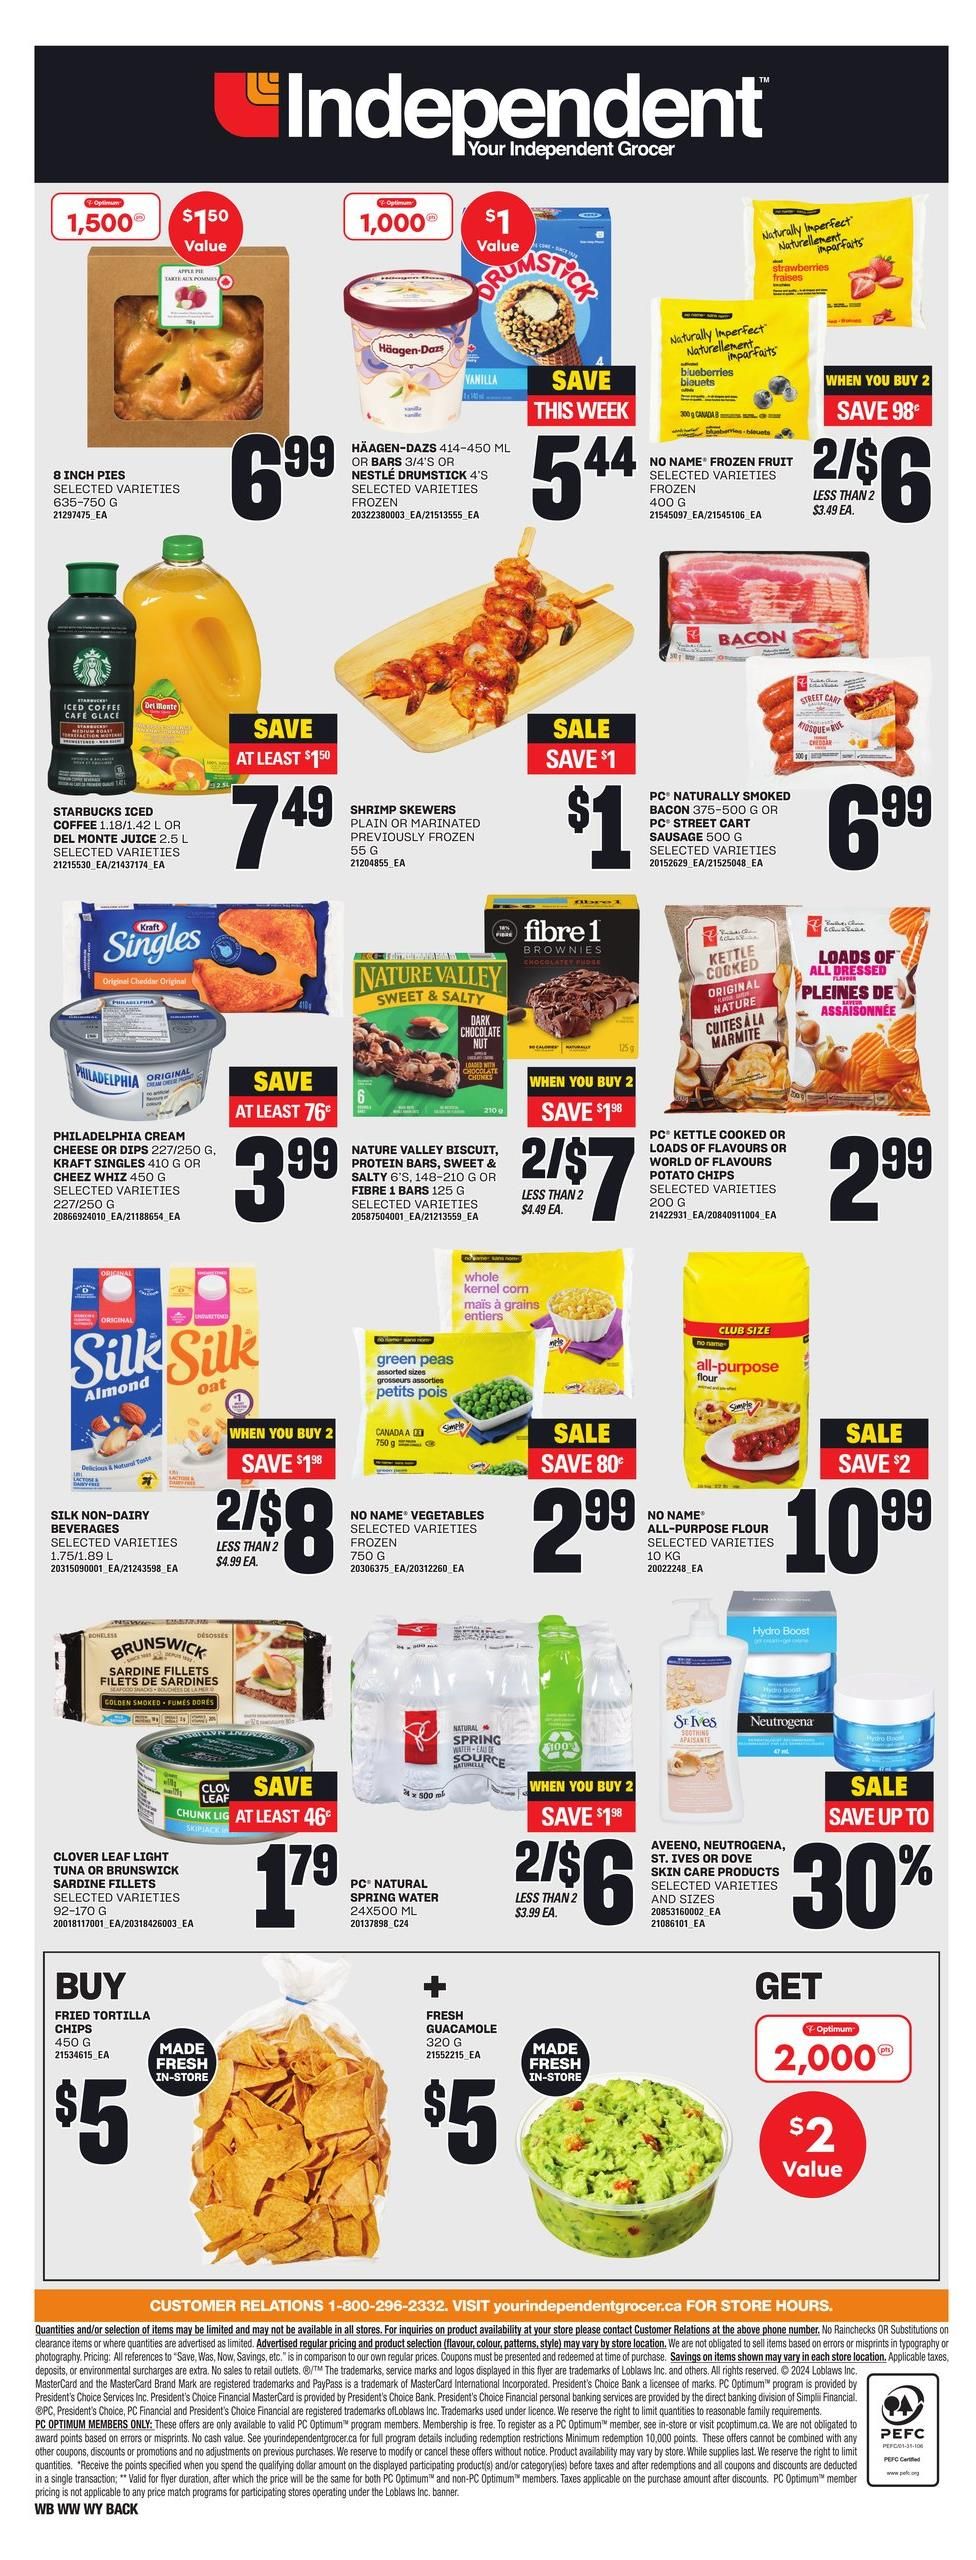 Independent - Western Canada - Weekly Flyer Specials - Page 3